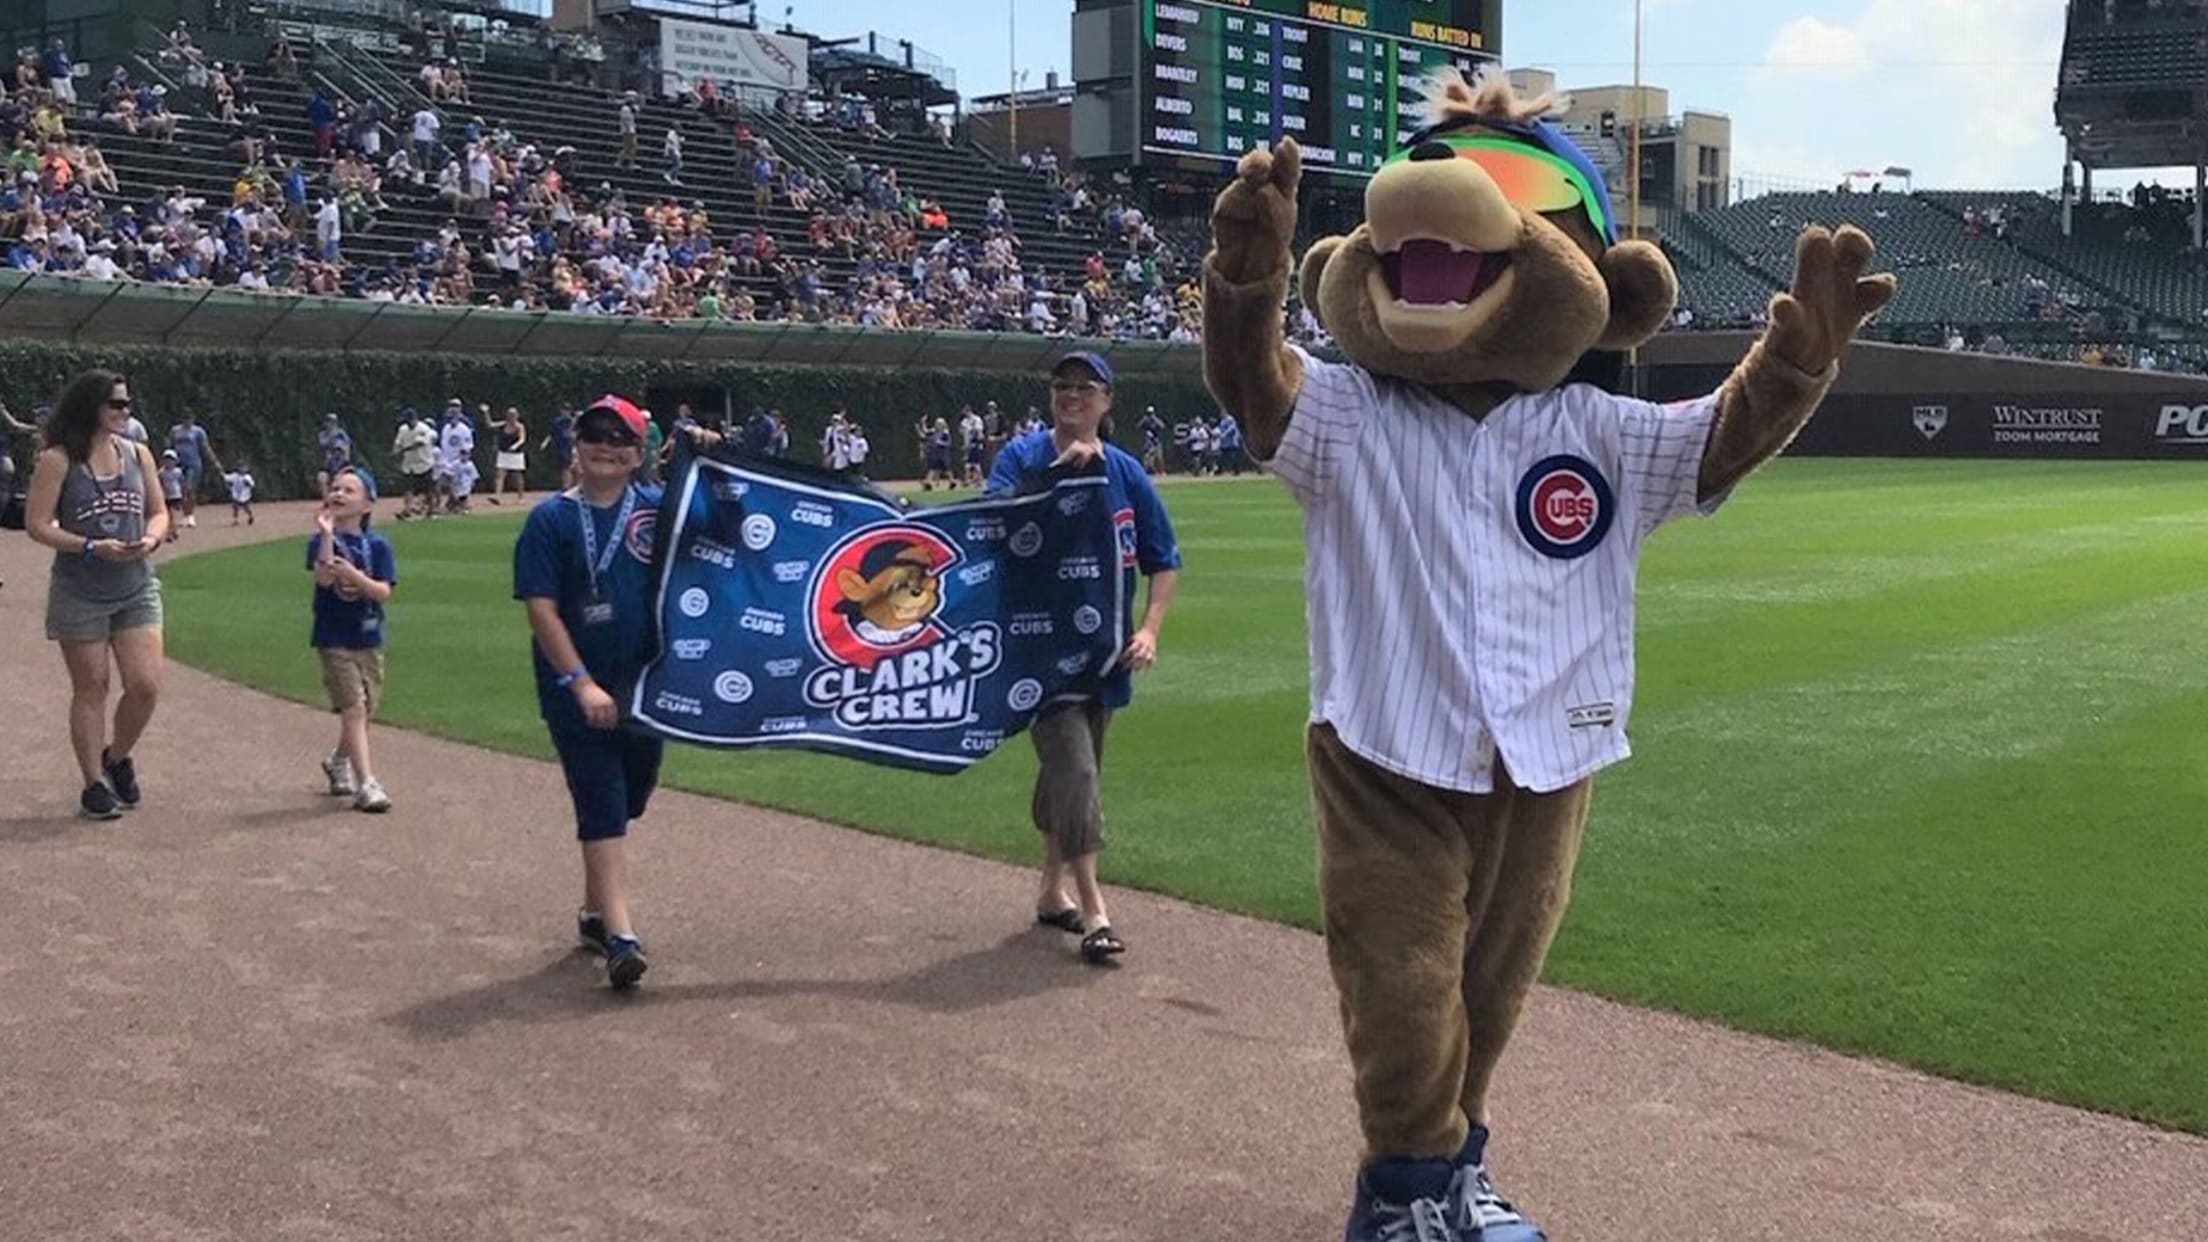 Clark the Cub is in MLB The Show 19 